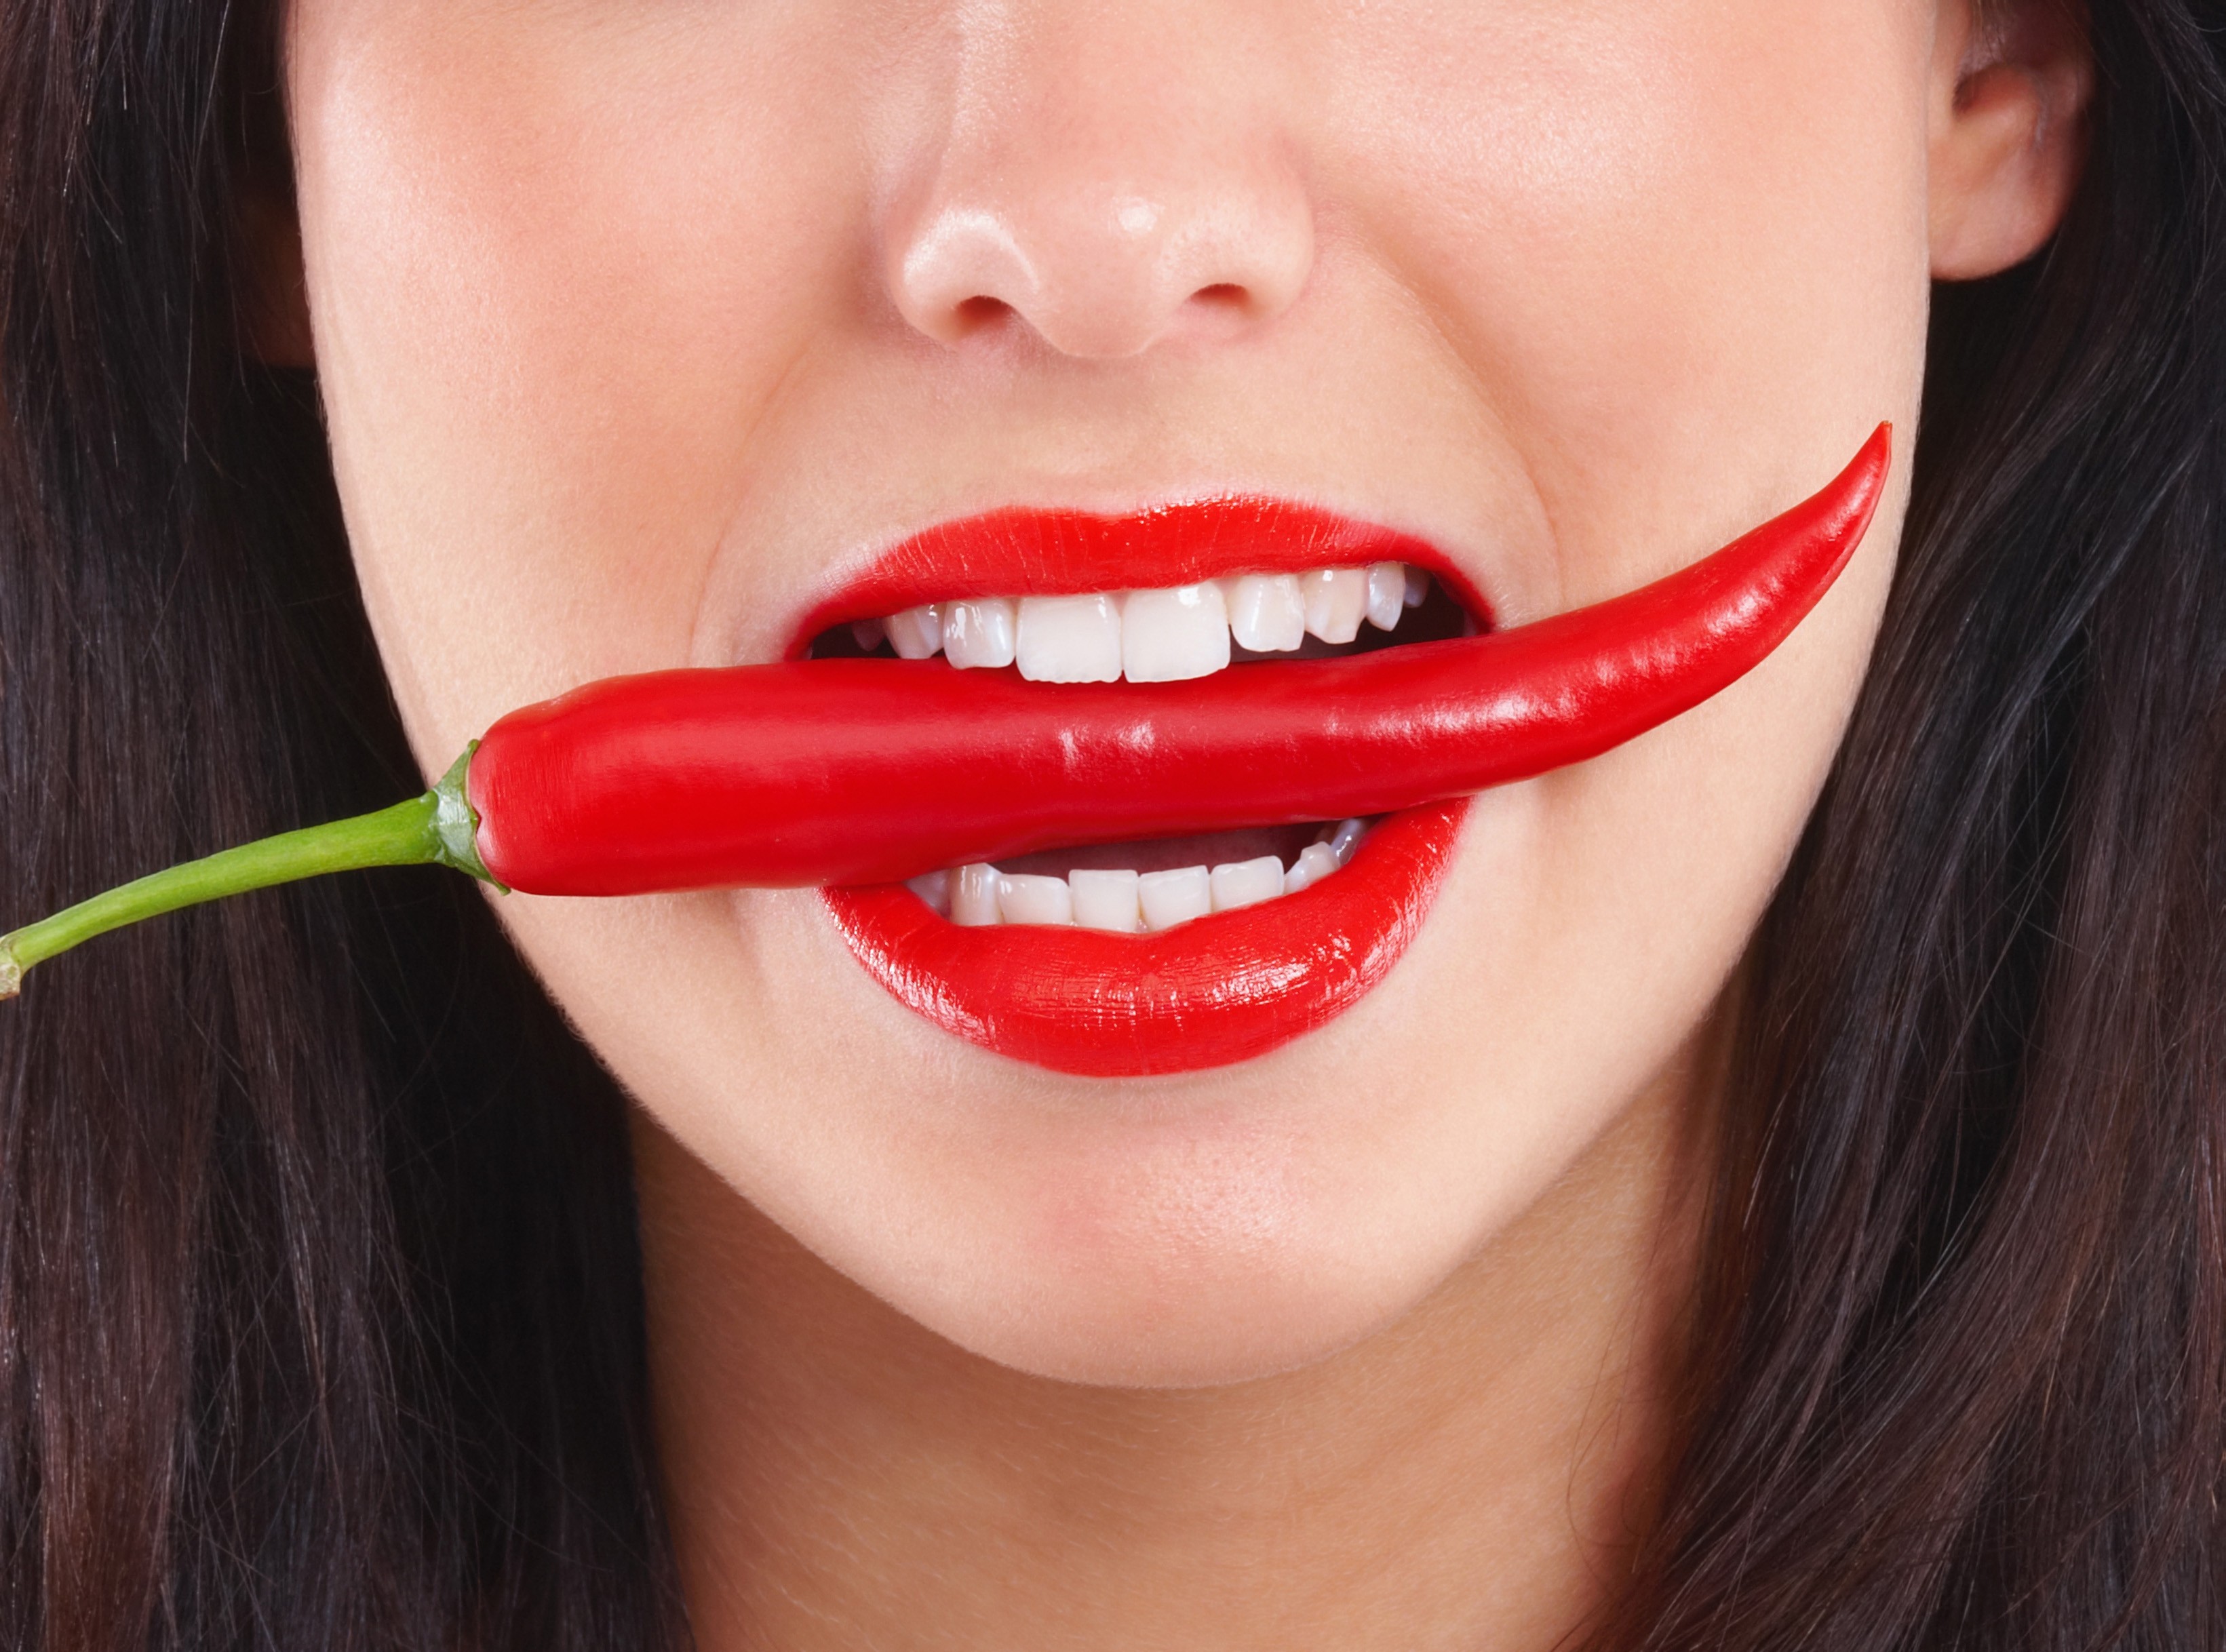 People 3282x2436 chilli peppers juicy lips red lipstick mouth women teeth red open mouth pepper food closeup lipstick